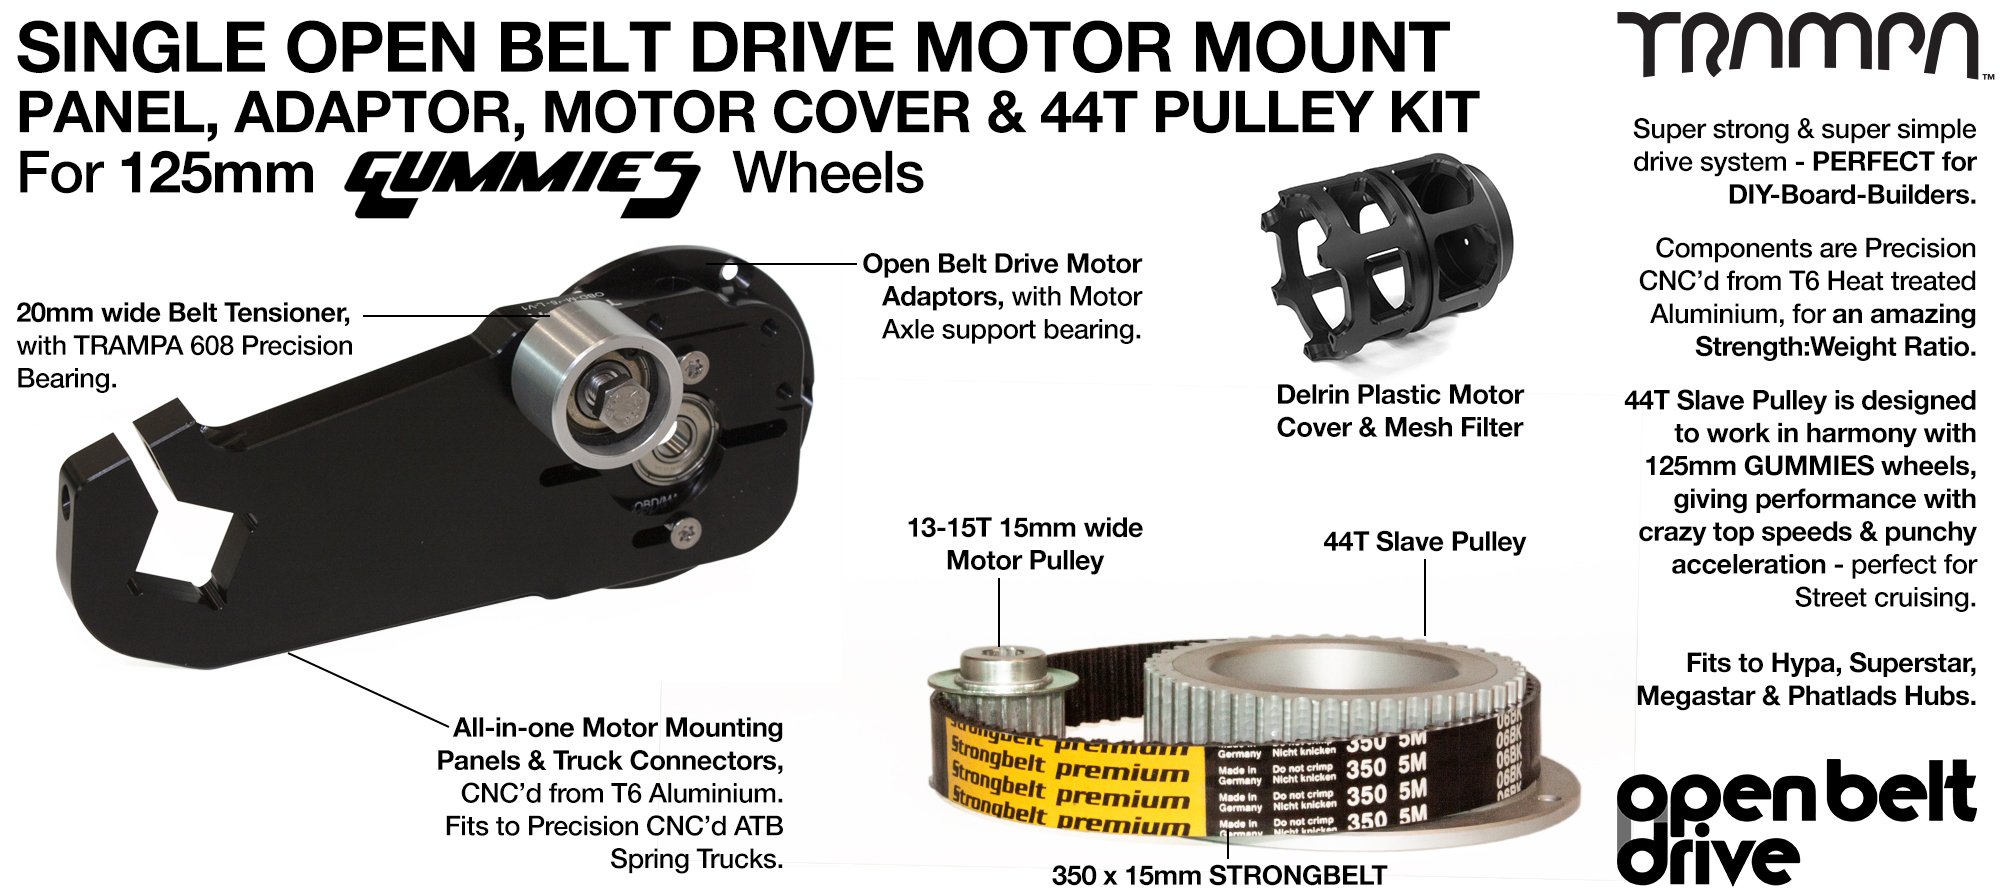 66T OBD Motor Mount with 44T Pulley kit & Motor Filters - SINGLE